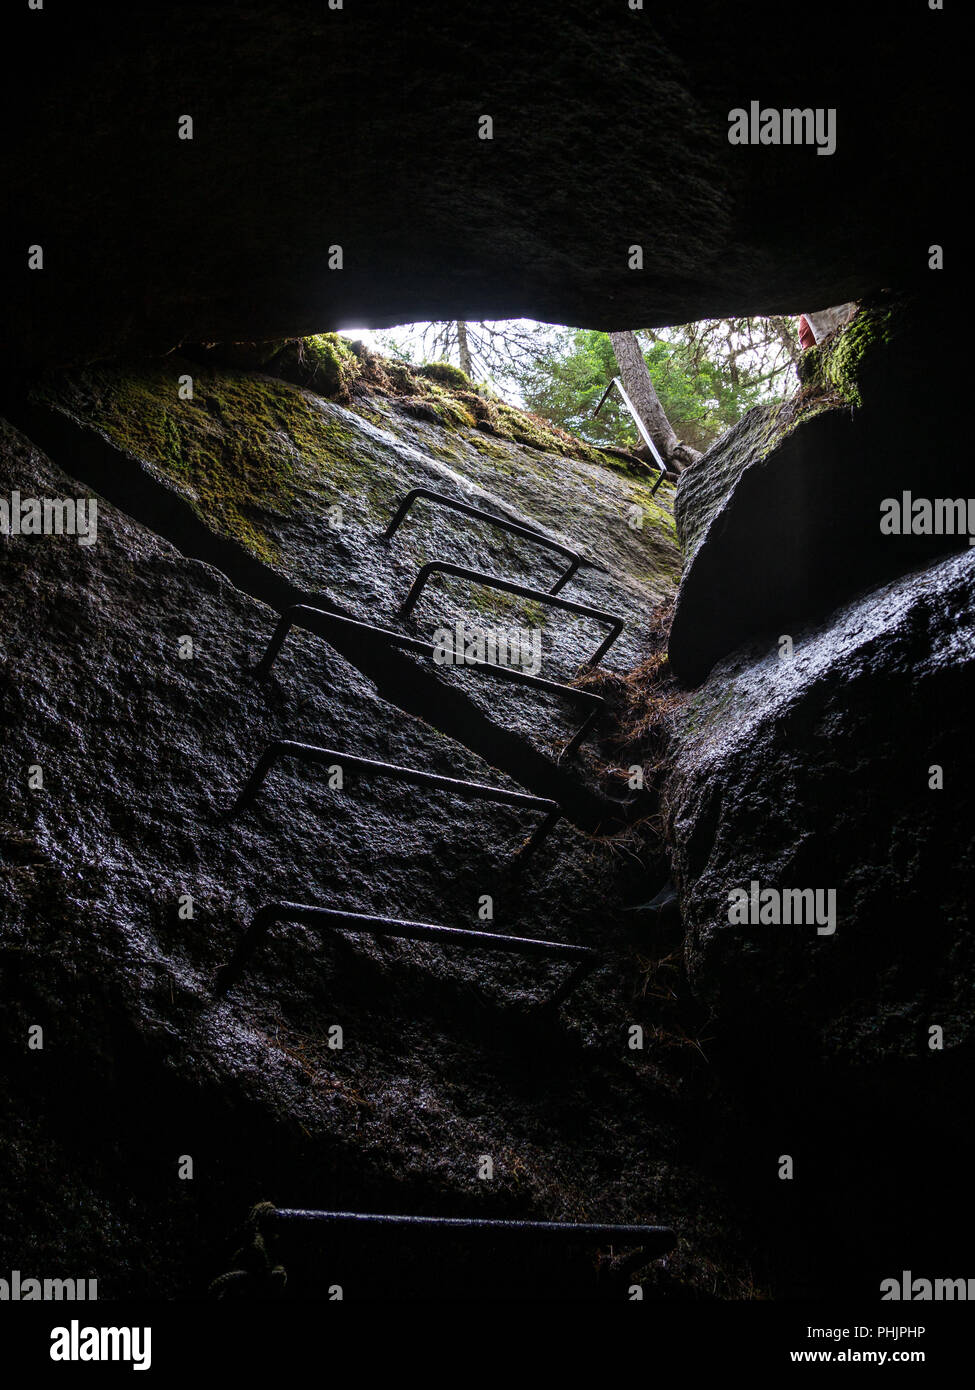 Interior of Cave, Looking Out to Forest, Metal Ladder in Stone Stock Photo